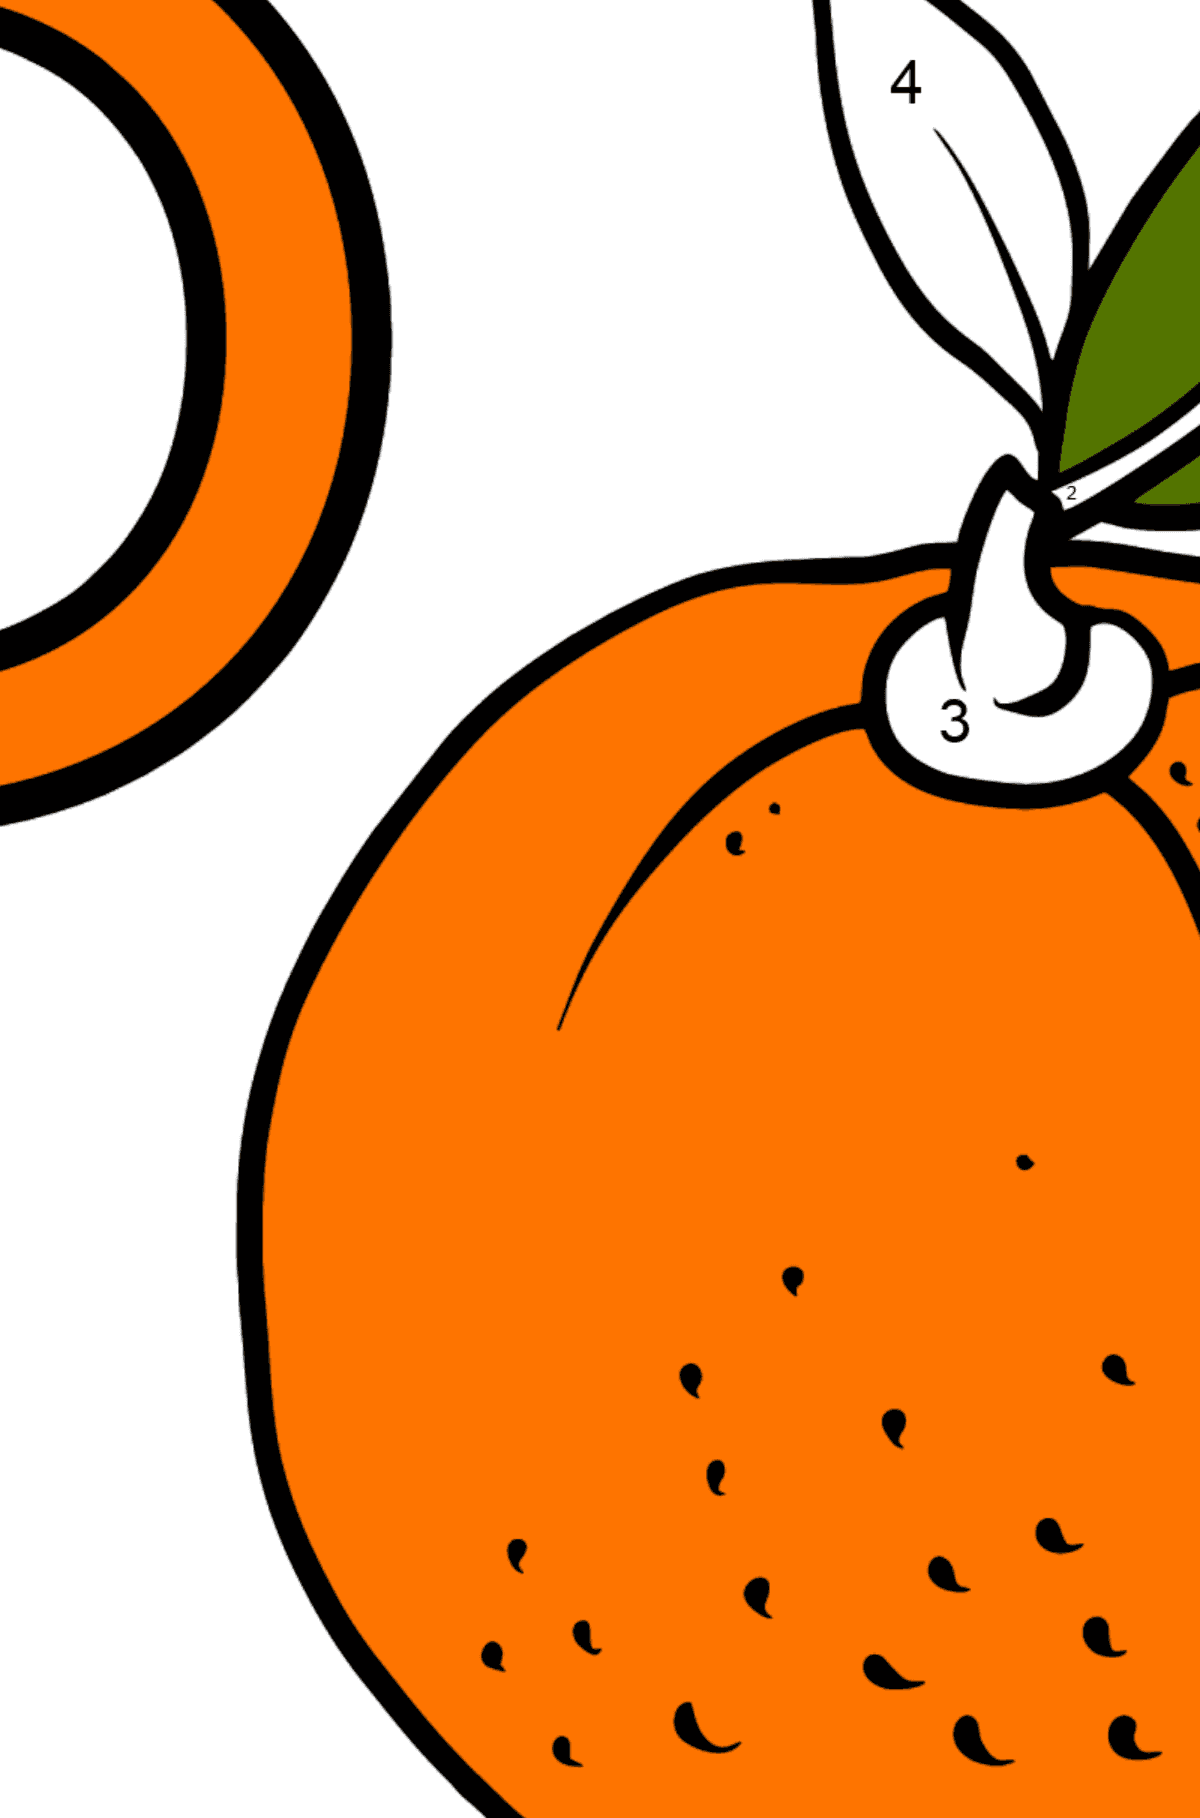 German Letter O coloring pages - ORANGE - Coloring by Numbers for Kids